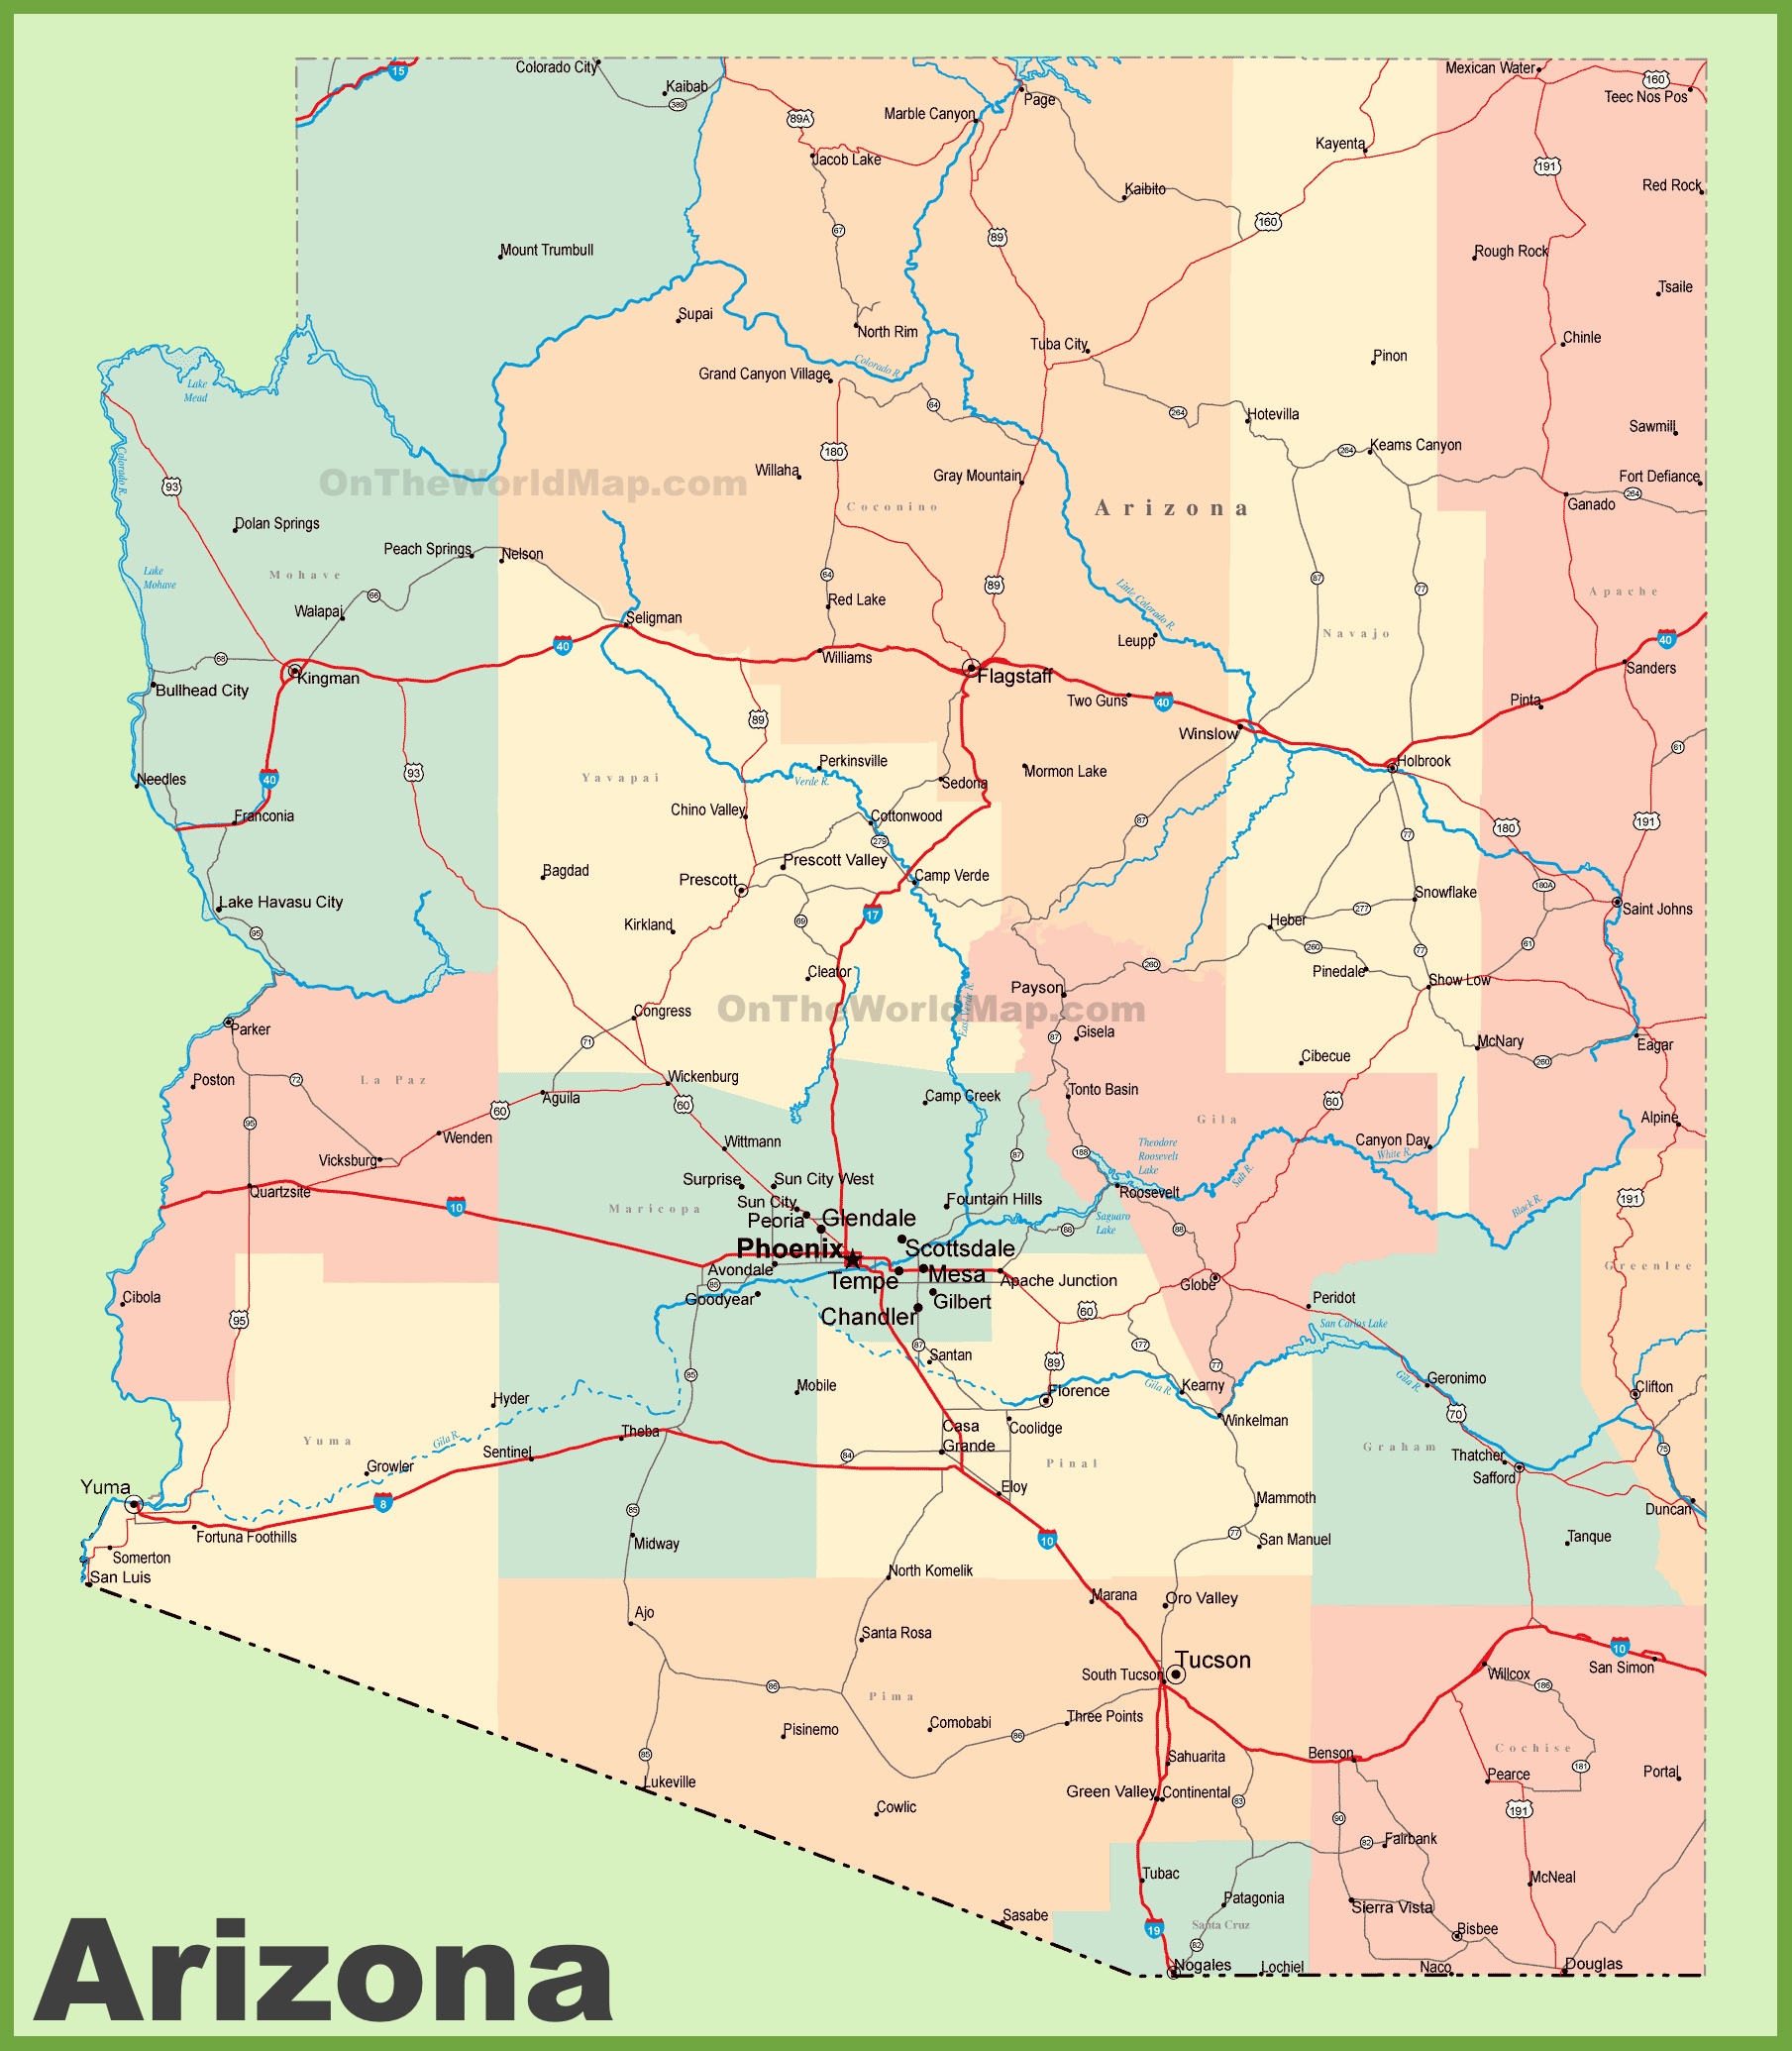 Arizona Road Map With Cities And Towns